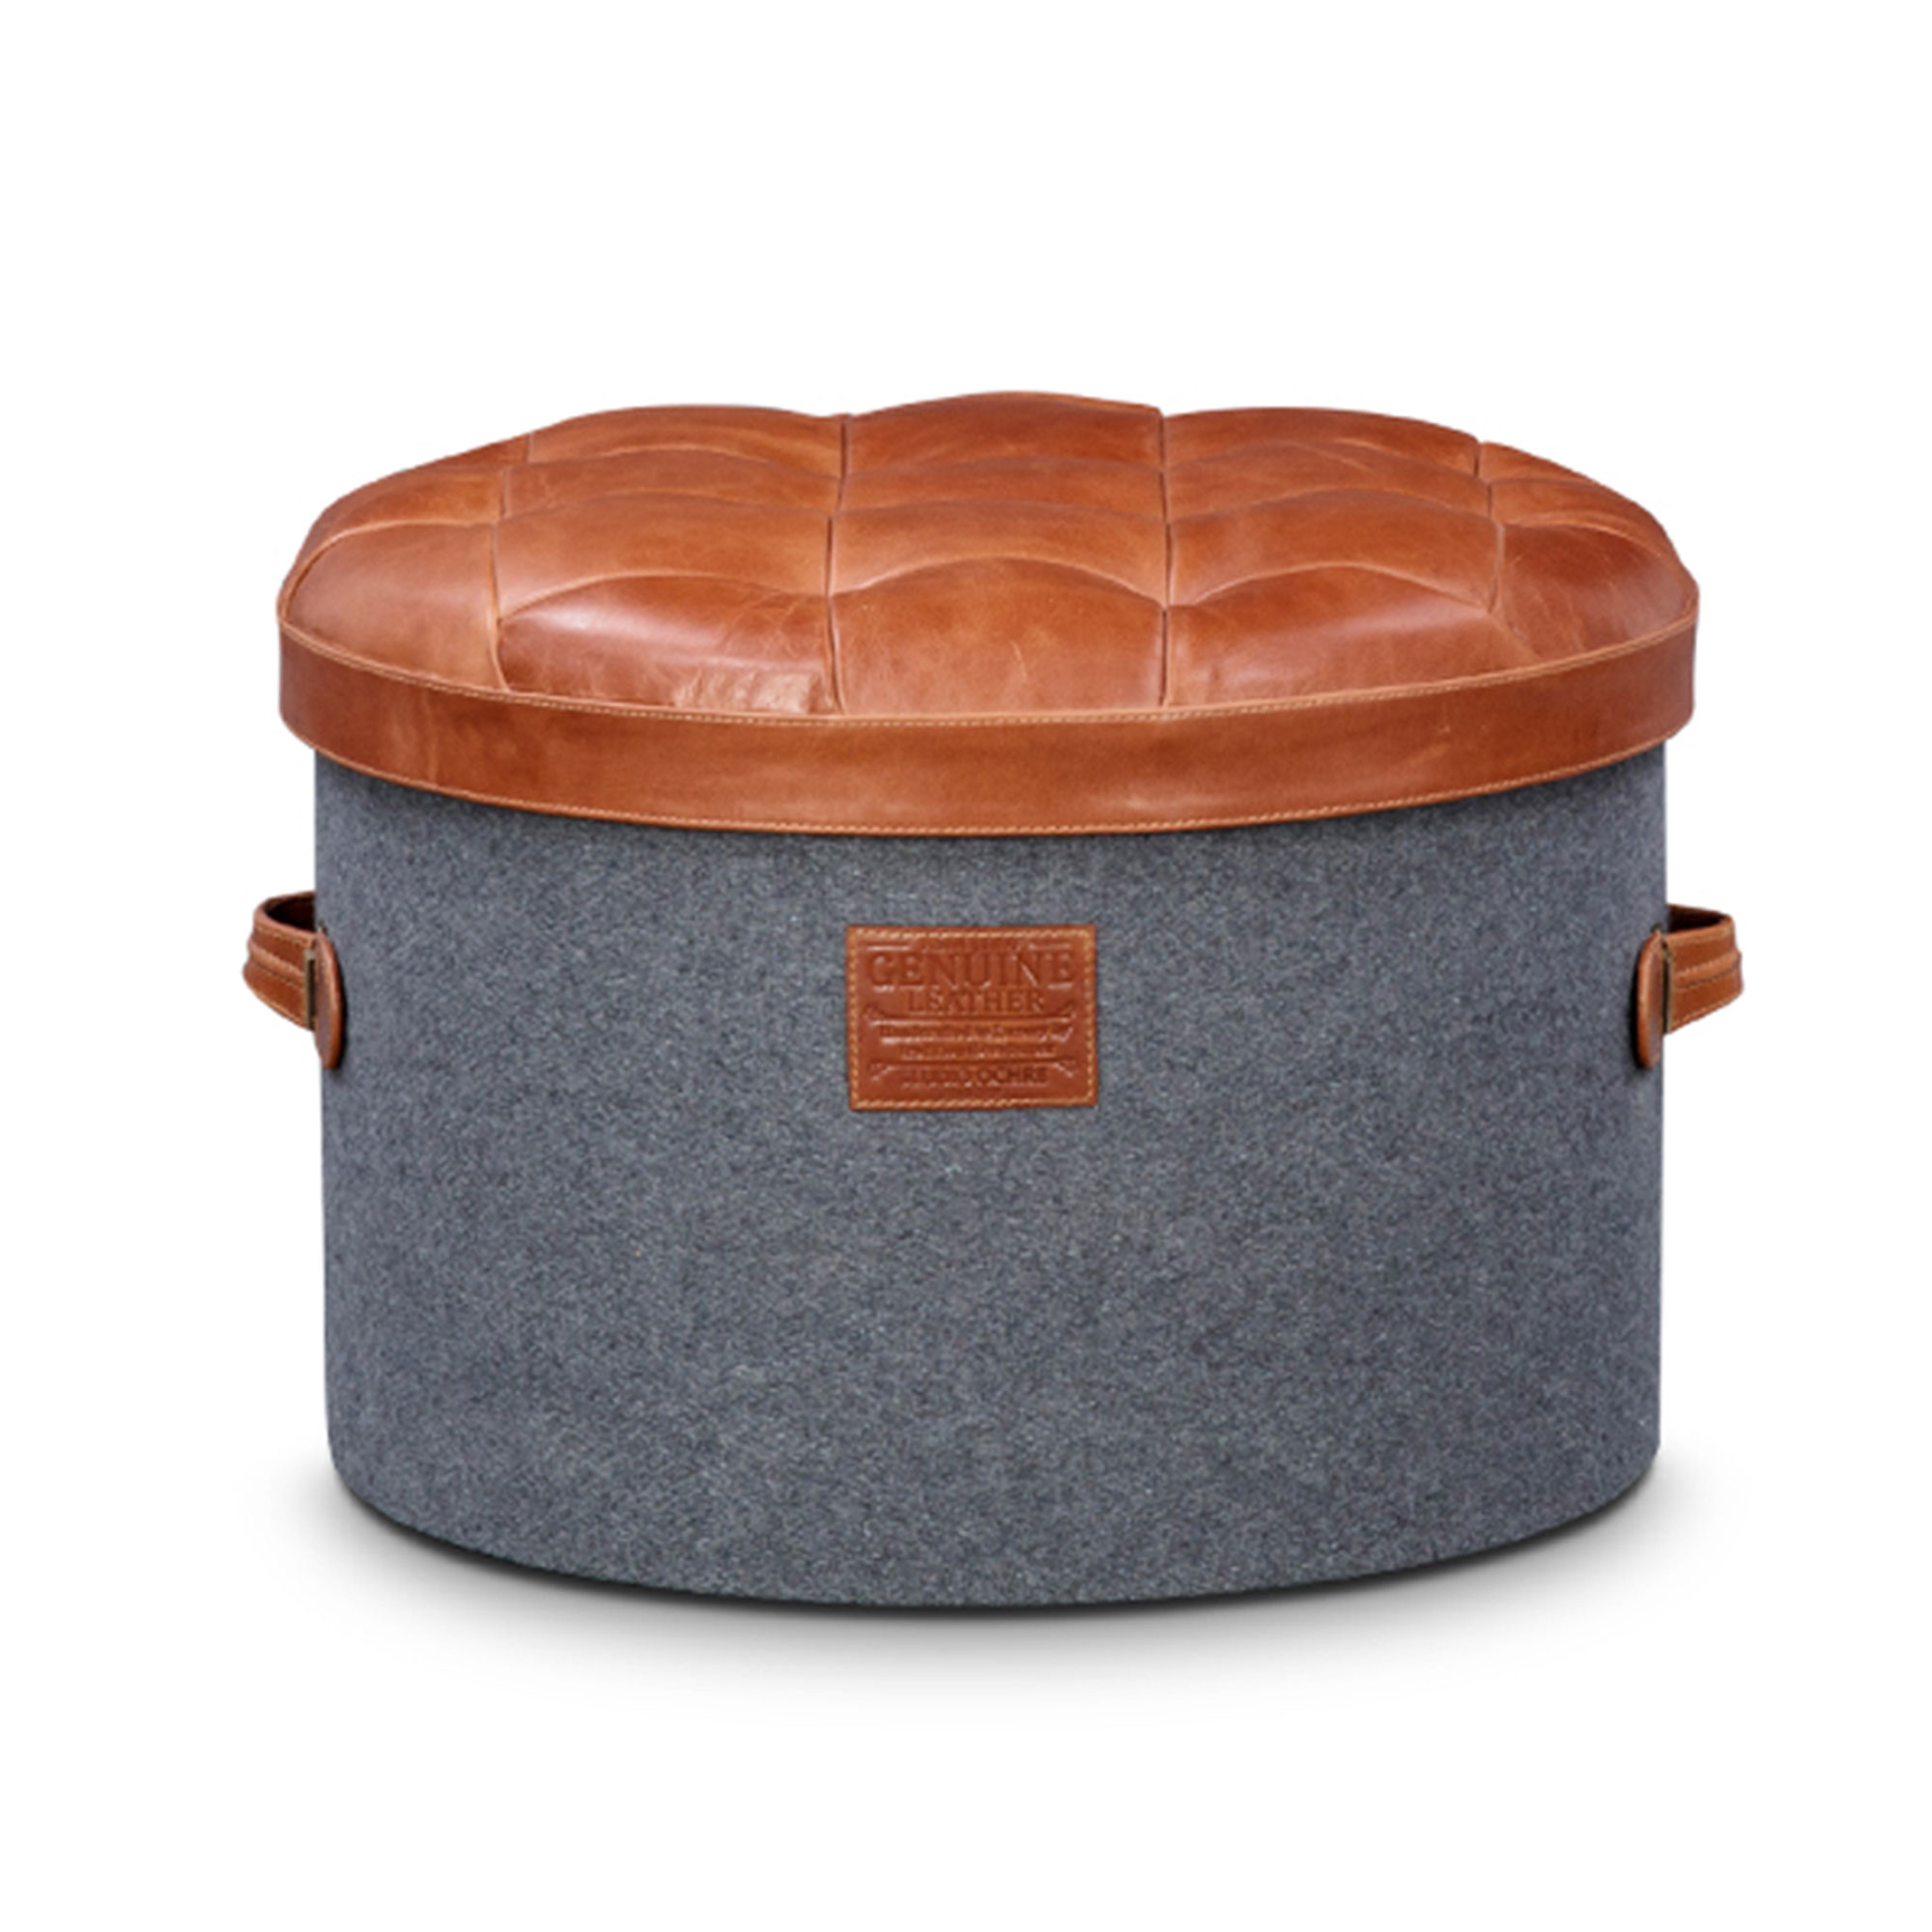 Stilettos Pouf Designs for Living Room in Grey & Brown Colour  - Beautiful Homes